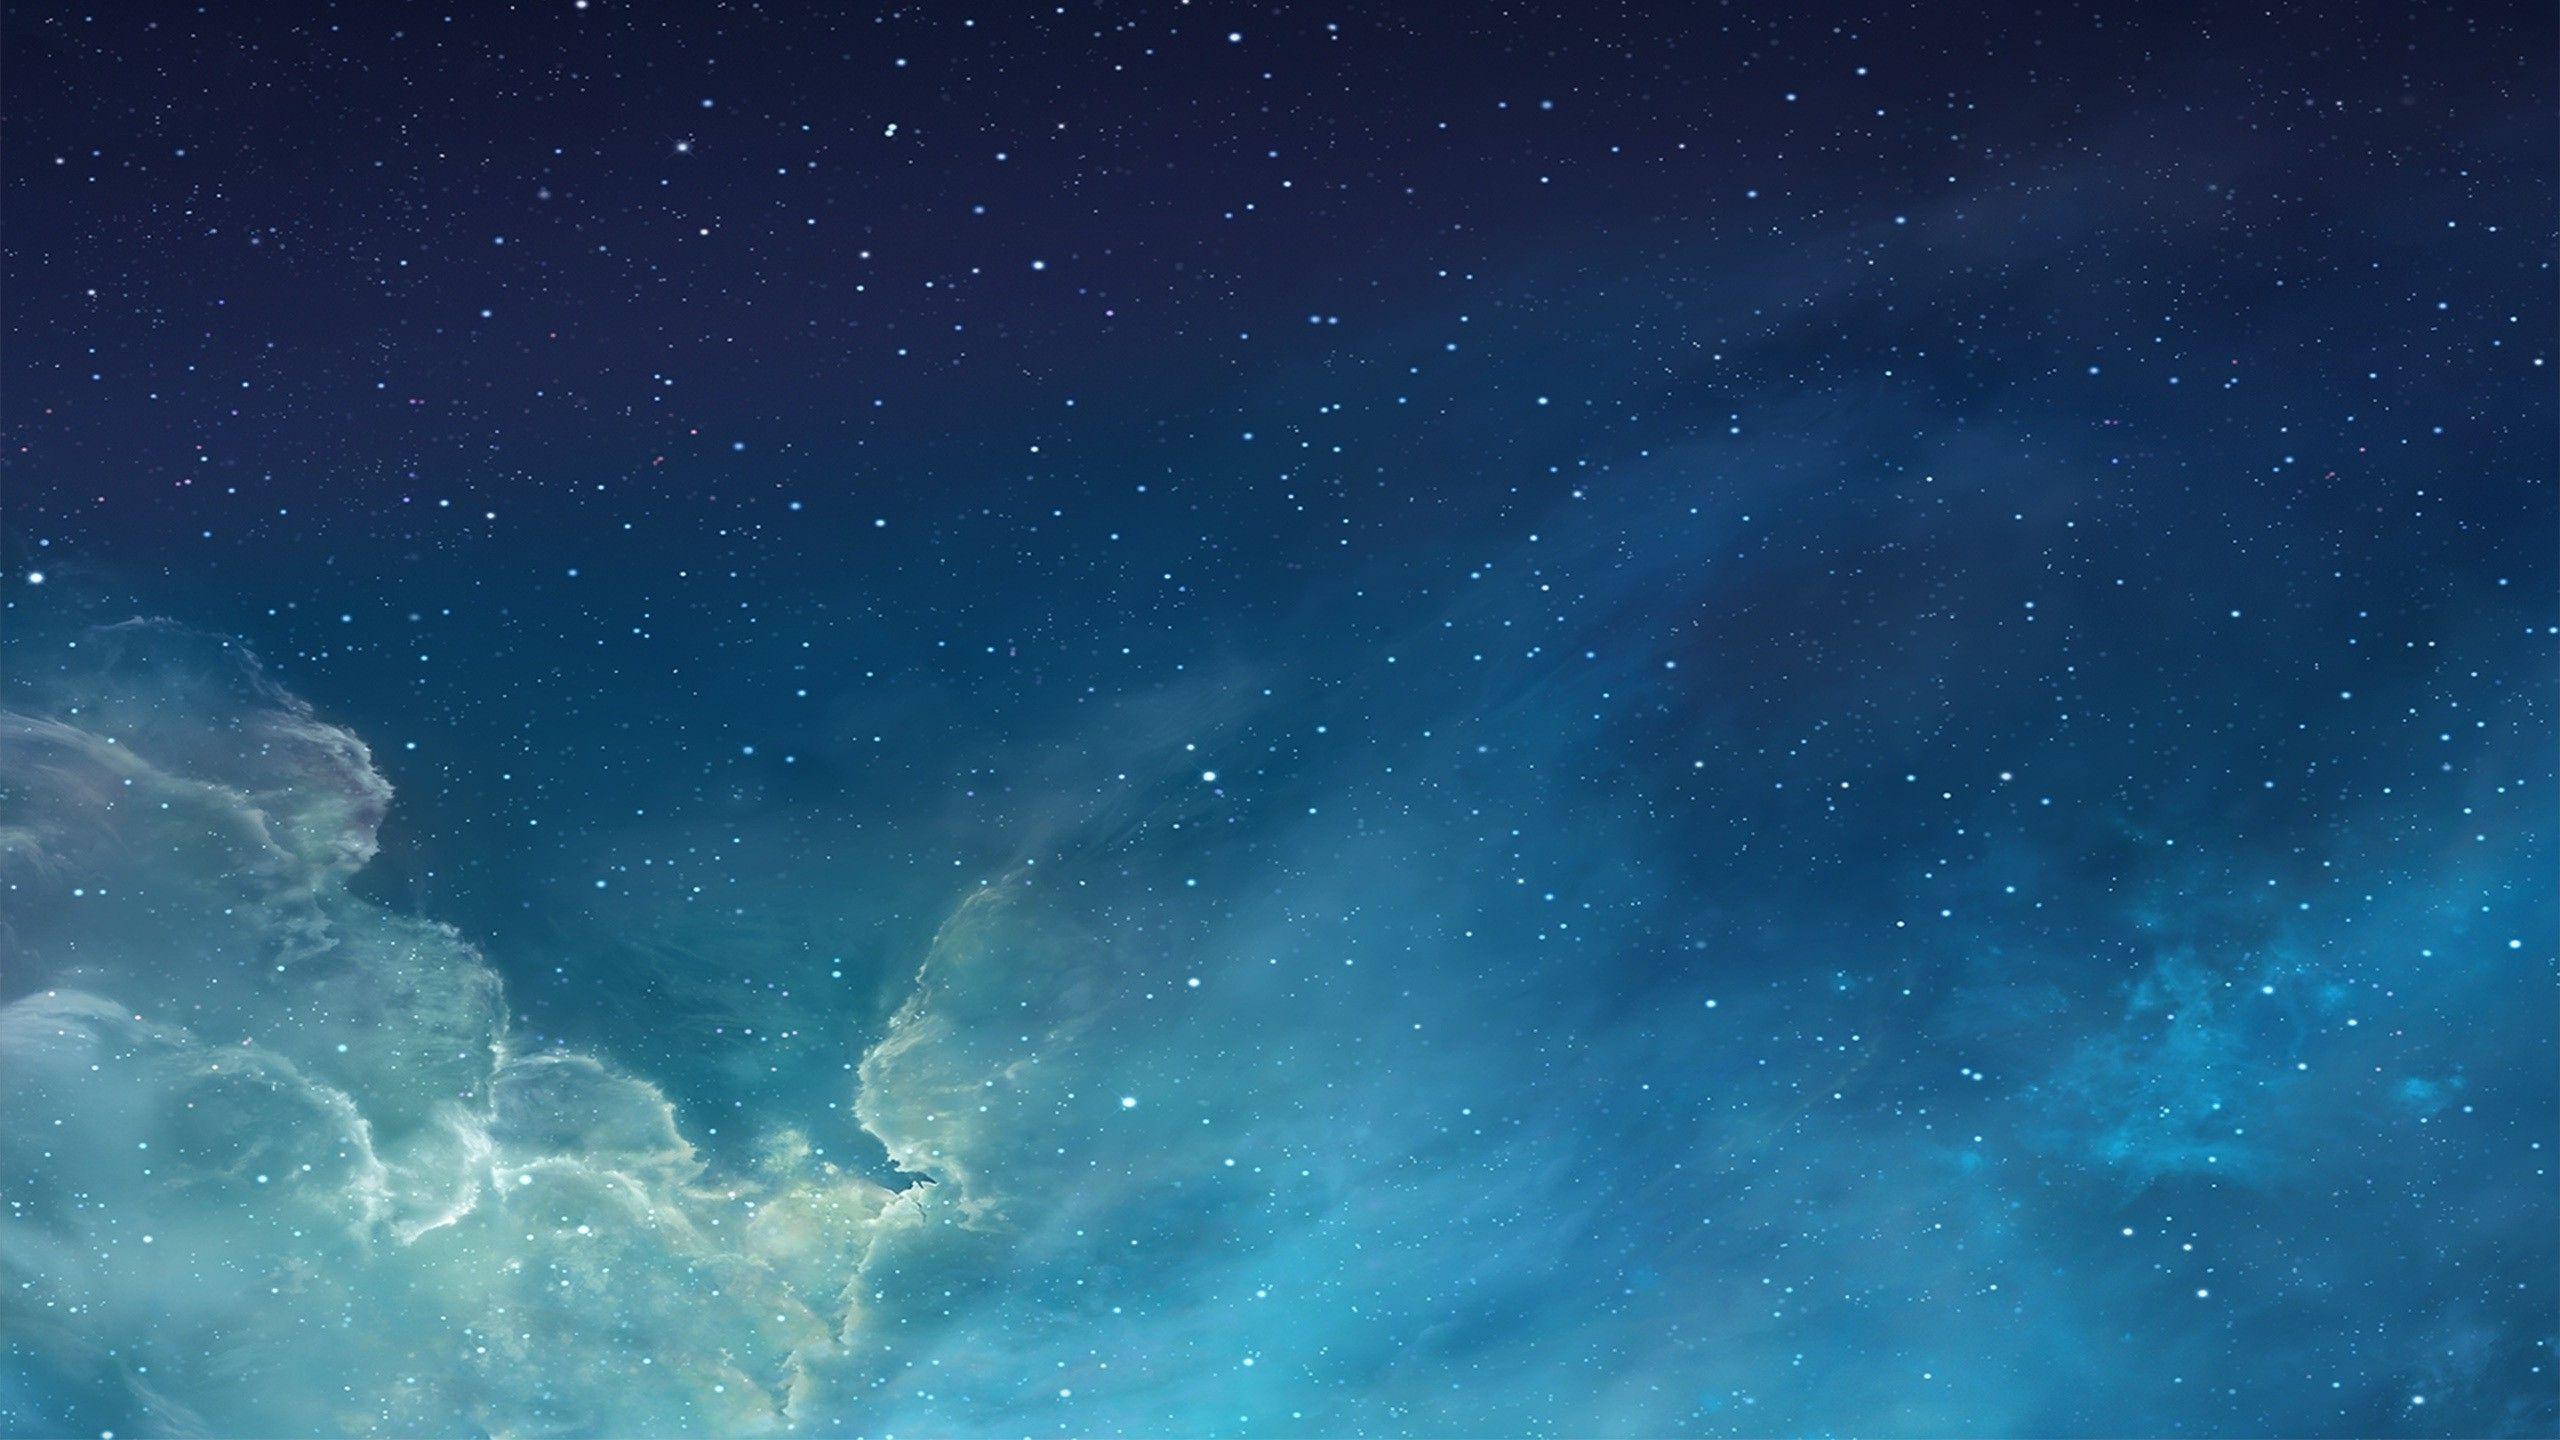 Star Wallpapers – Star Wallpapers Collection for PC & Mac, Tablet